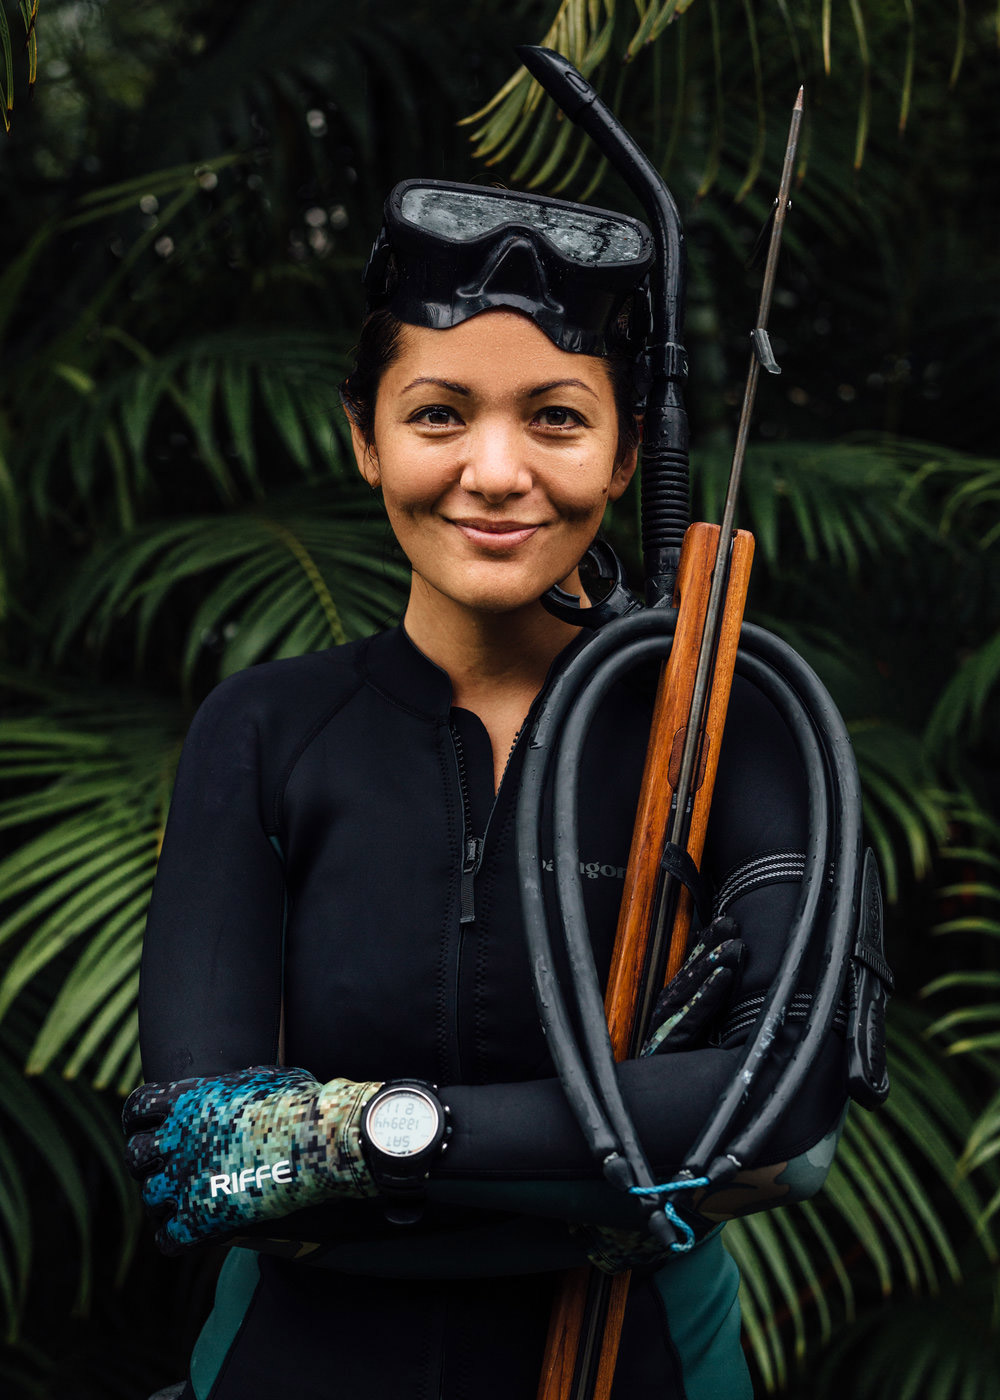 Kimi Werner is a Hawaii based free diver, US National Spearfishing Champion, certified culinary chef, artist and speaker.